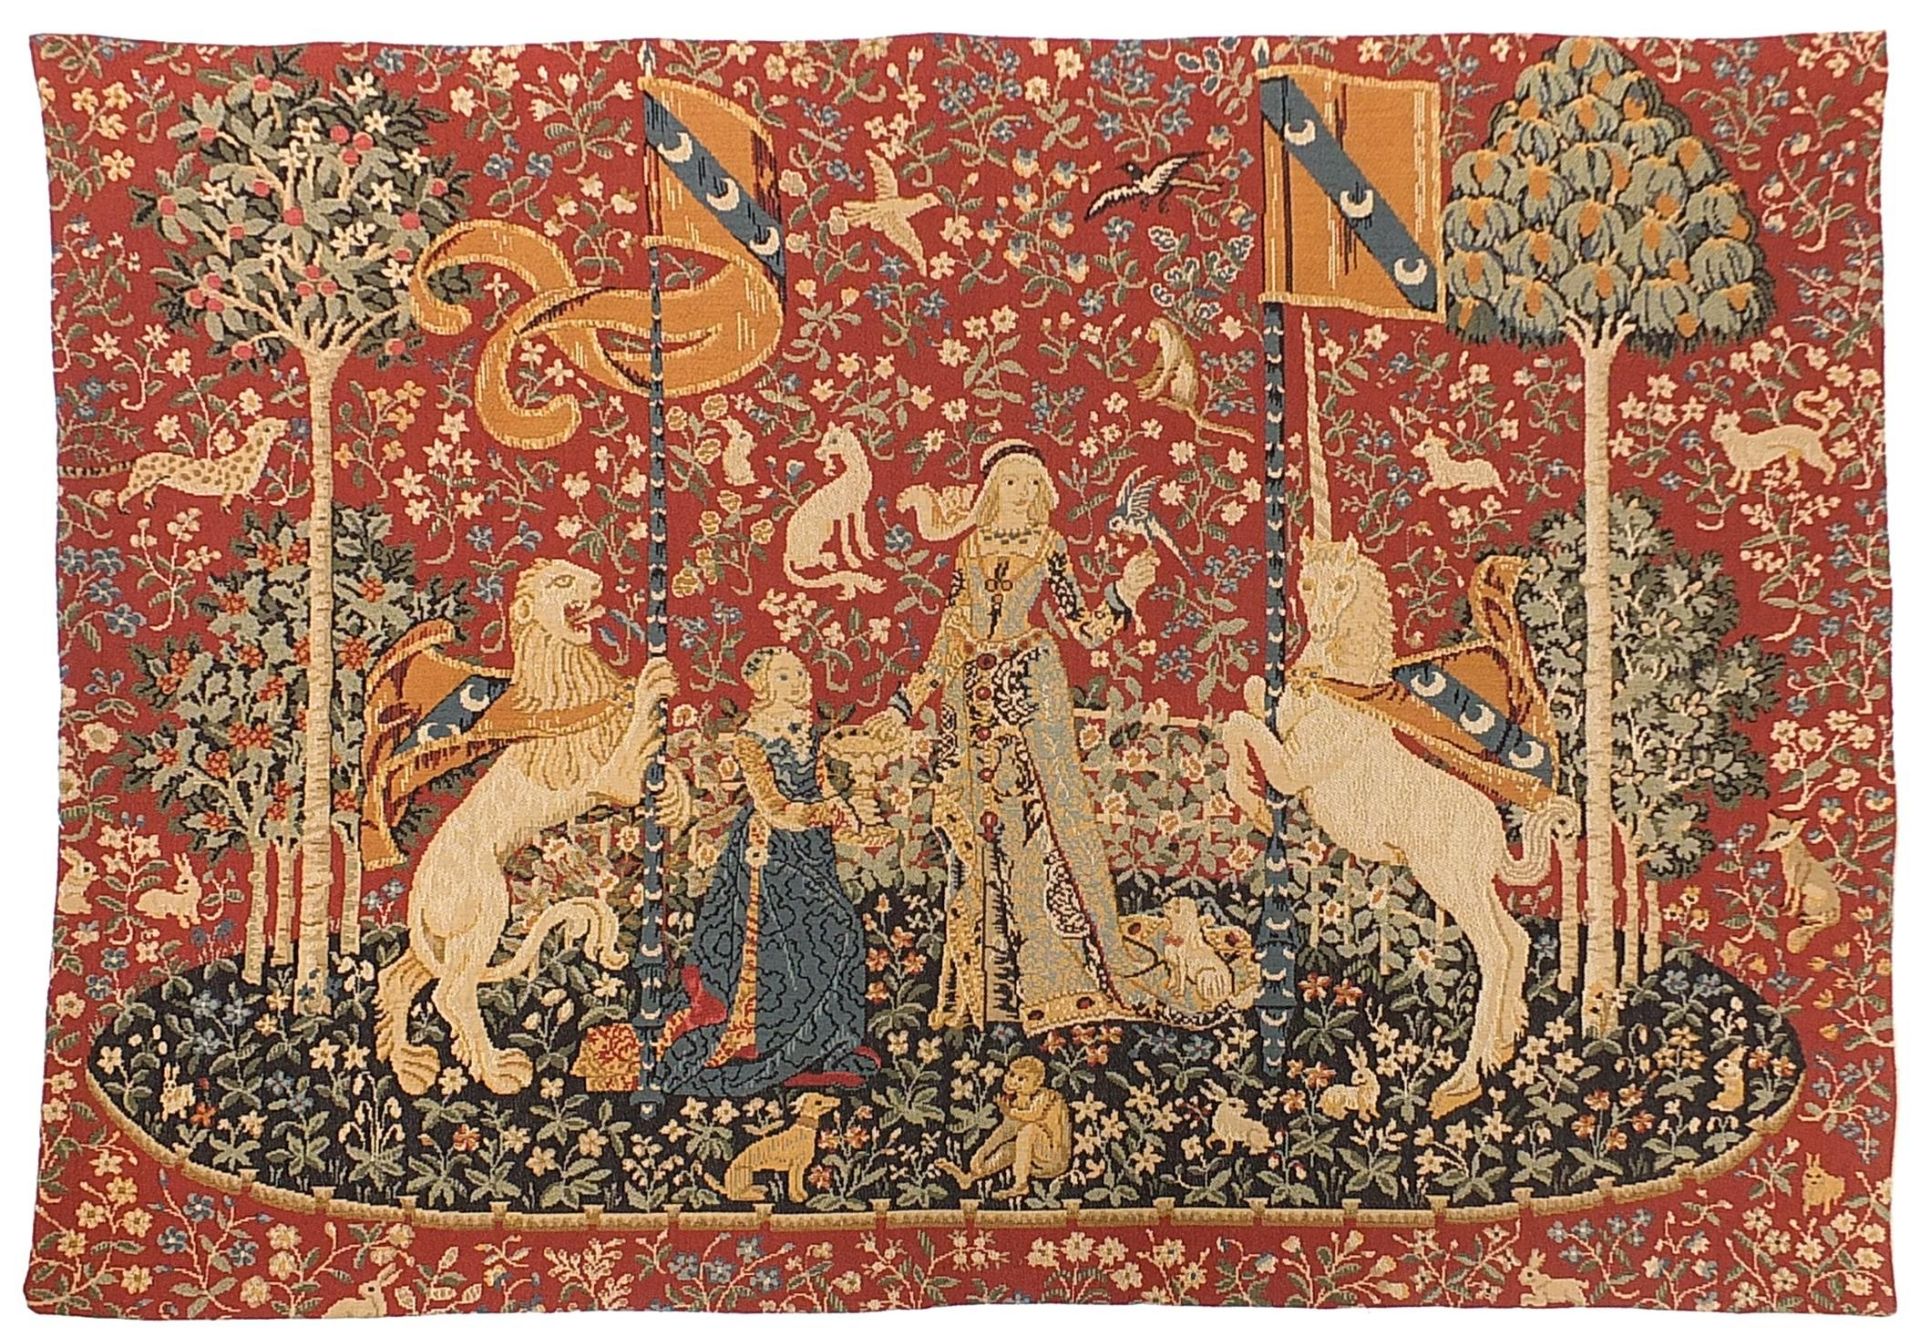 Rectangular wall hanging tapestry woven with medieval figures and animals, 170cm x 125cm